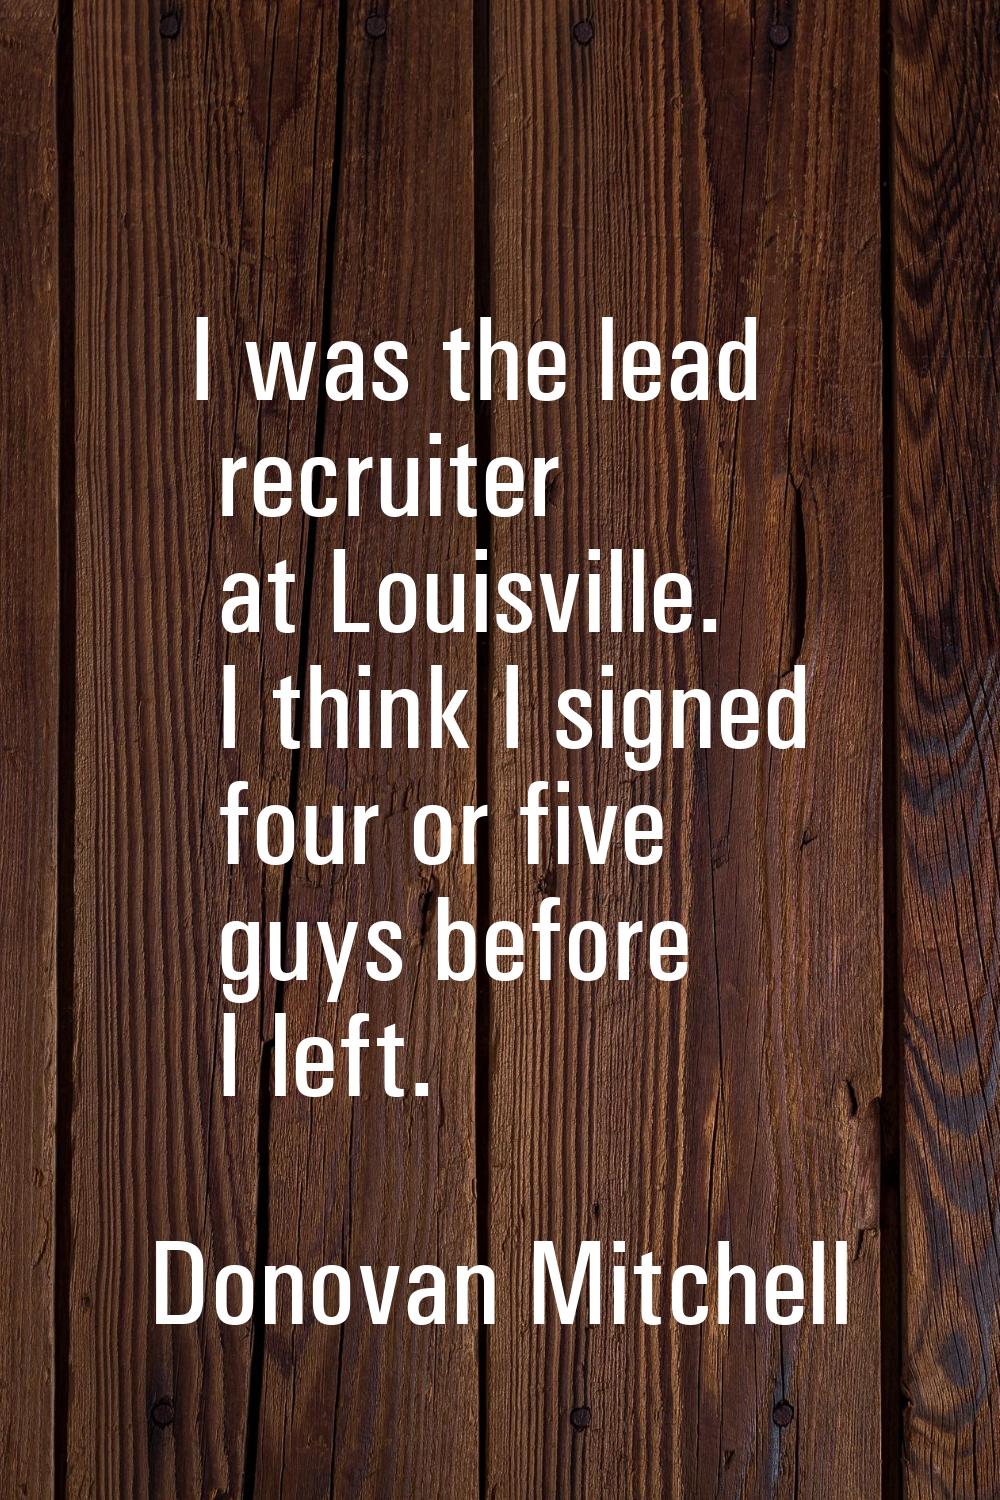 I was the lead recruiter at Louisville. I think I signed four or five guys before I left.